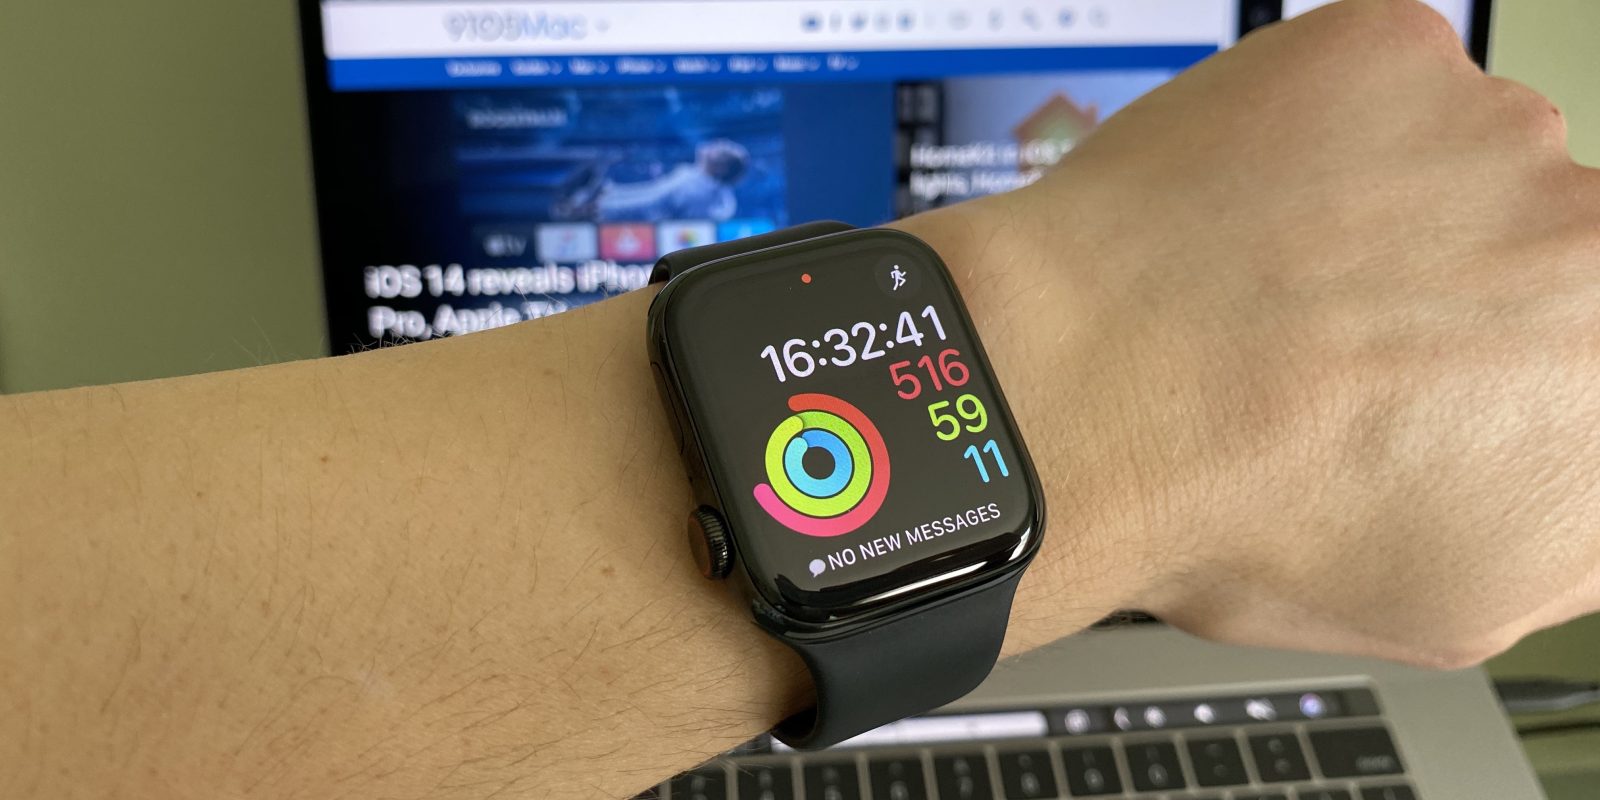 How to set Apple Watch military time 24-hour time